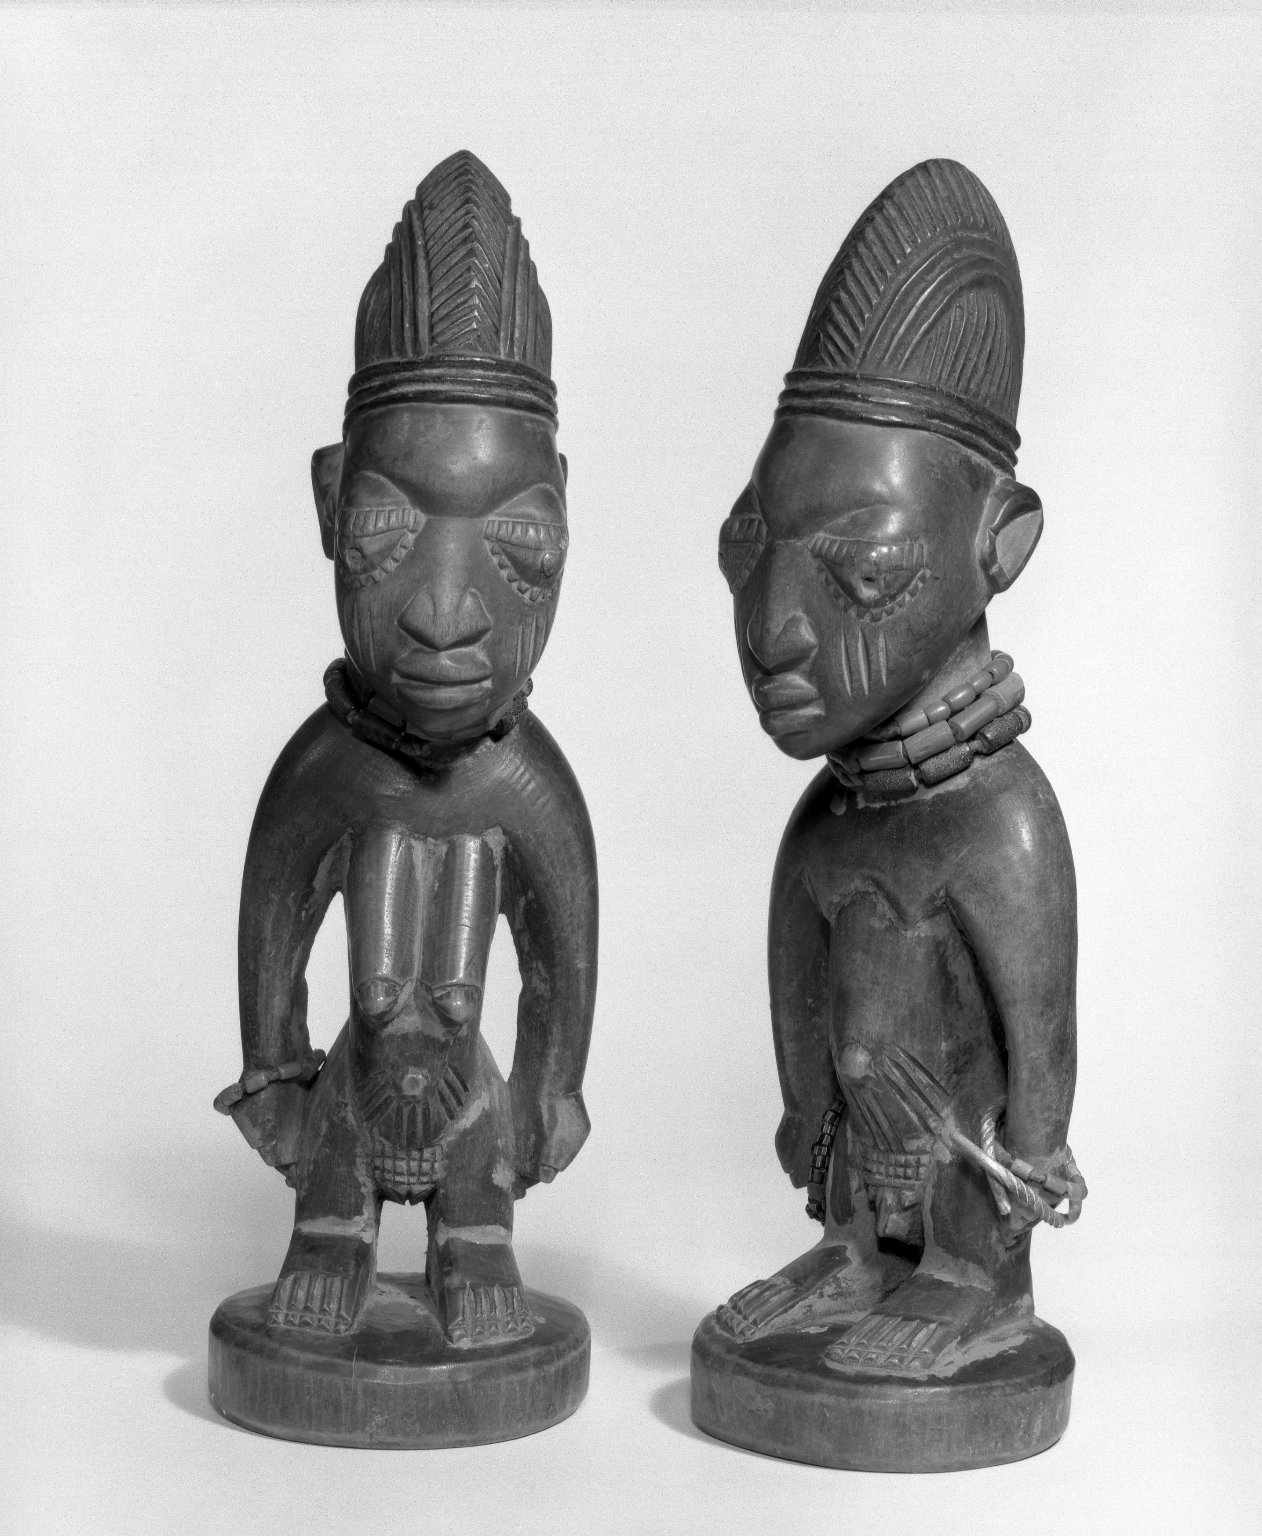 A pair of traditional carved wooden Yoruba ibeji statues.